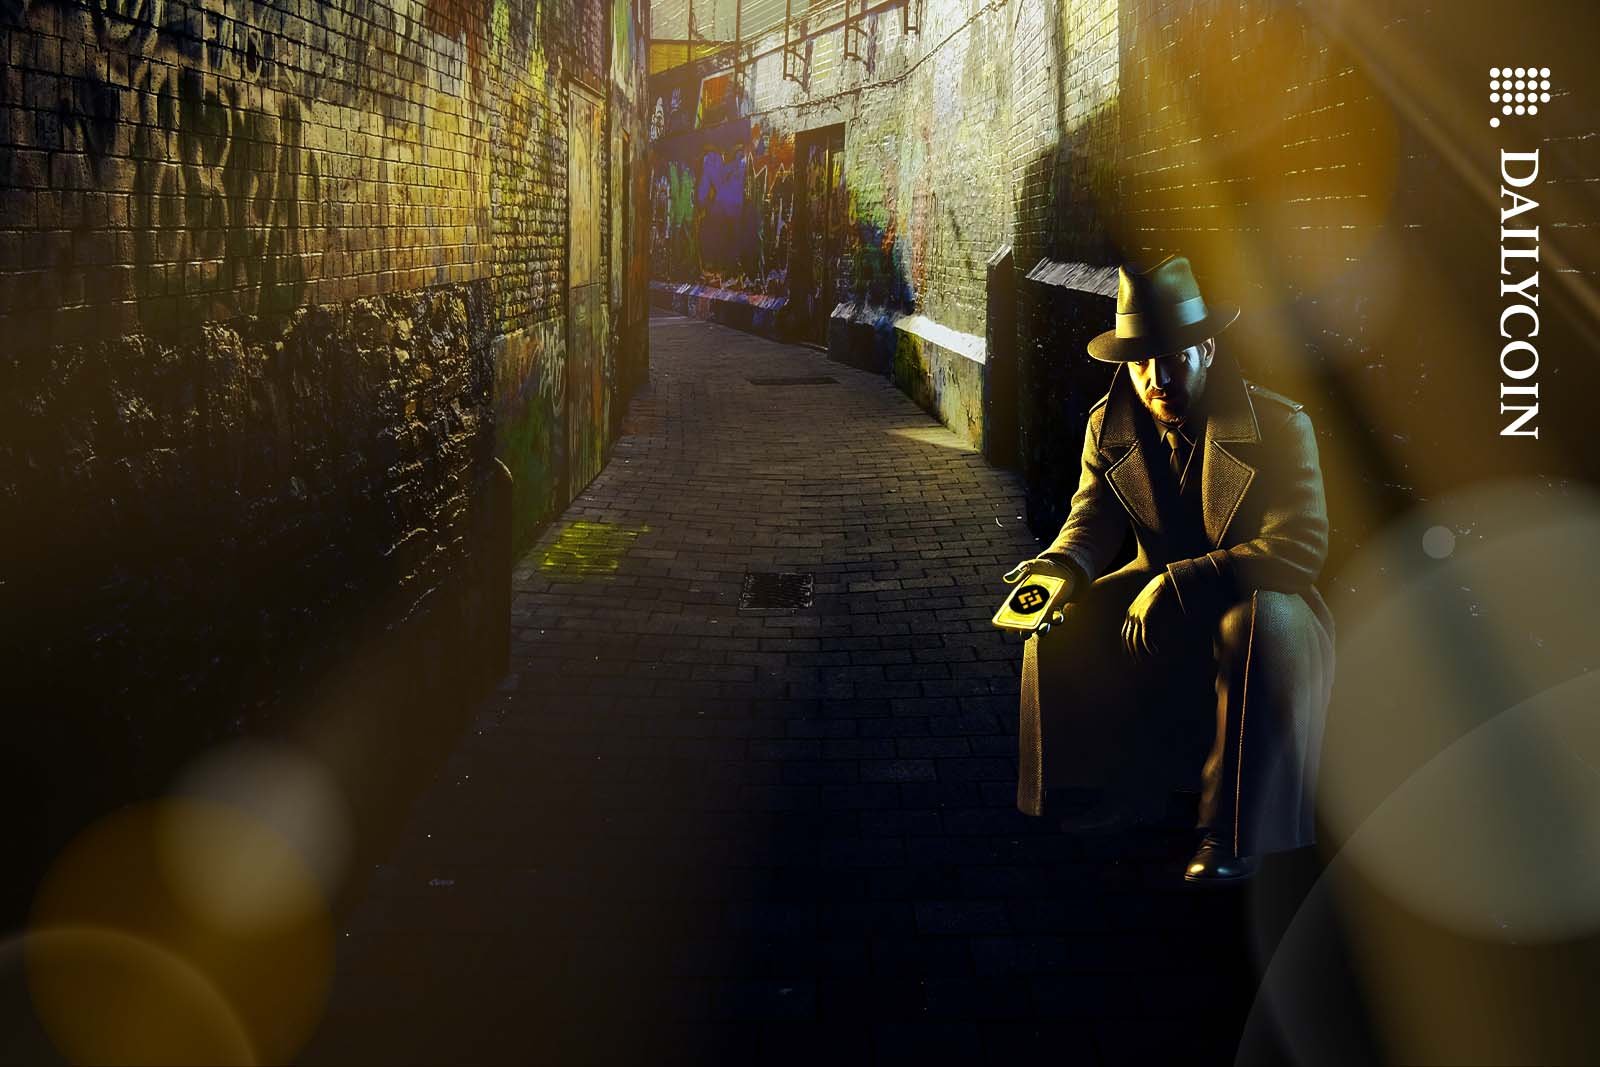 Man selling a Binance branded golden ticket in a dark graffiti covered alley.